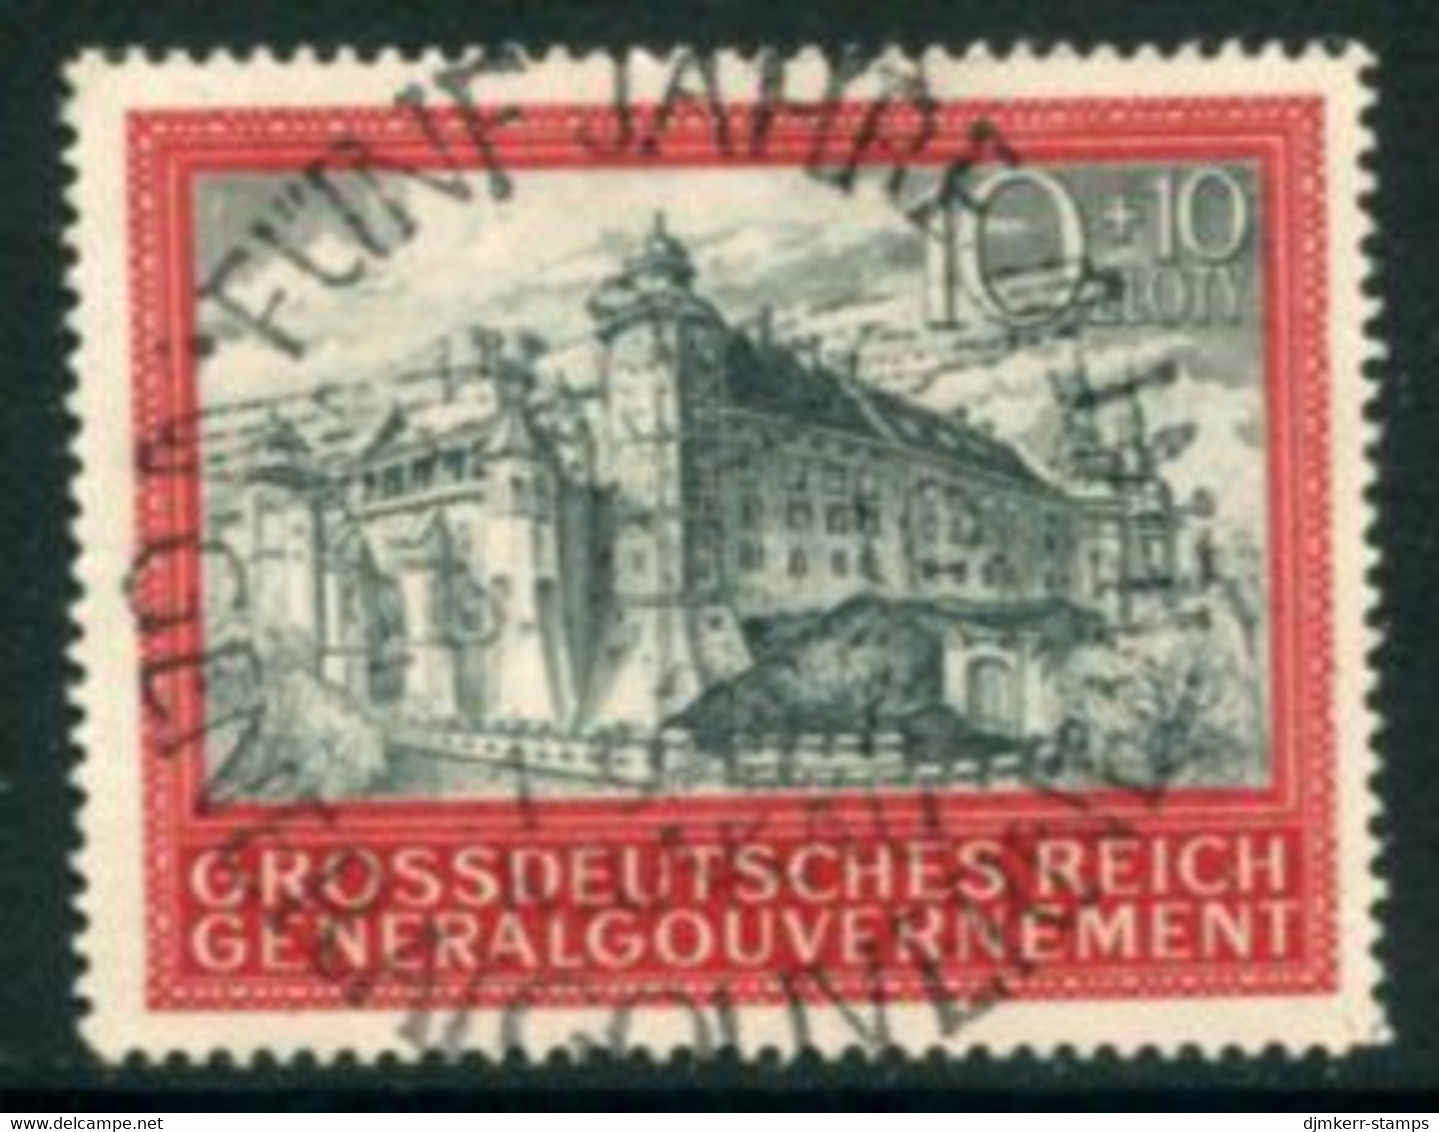 GENERAL GOVERNMENT 1944 Fifth Anniversary Used   Michel 125 - Governo Generale